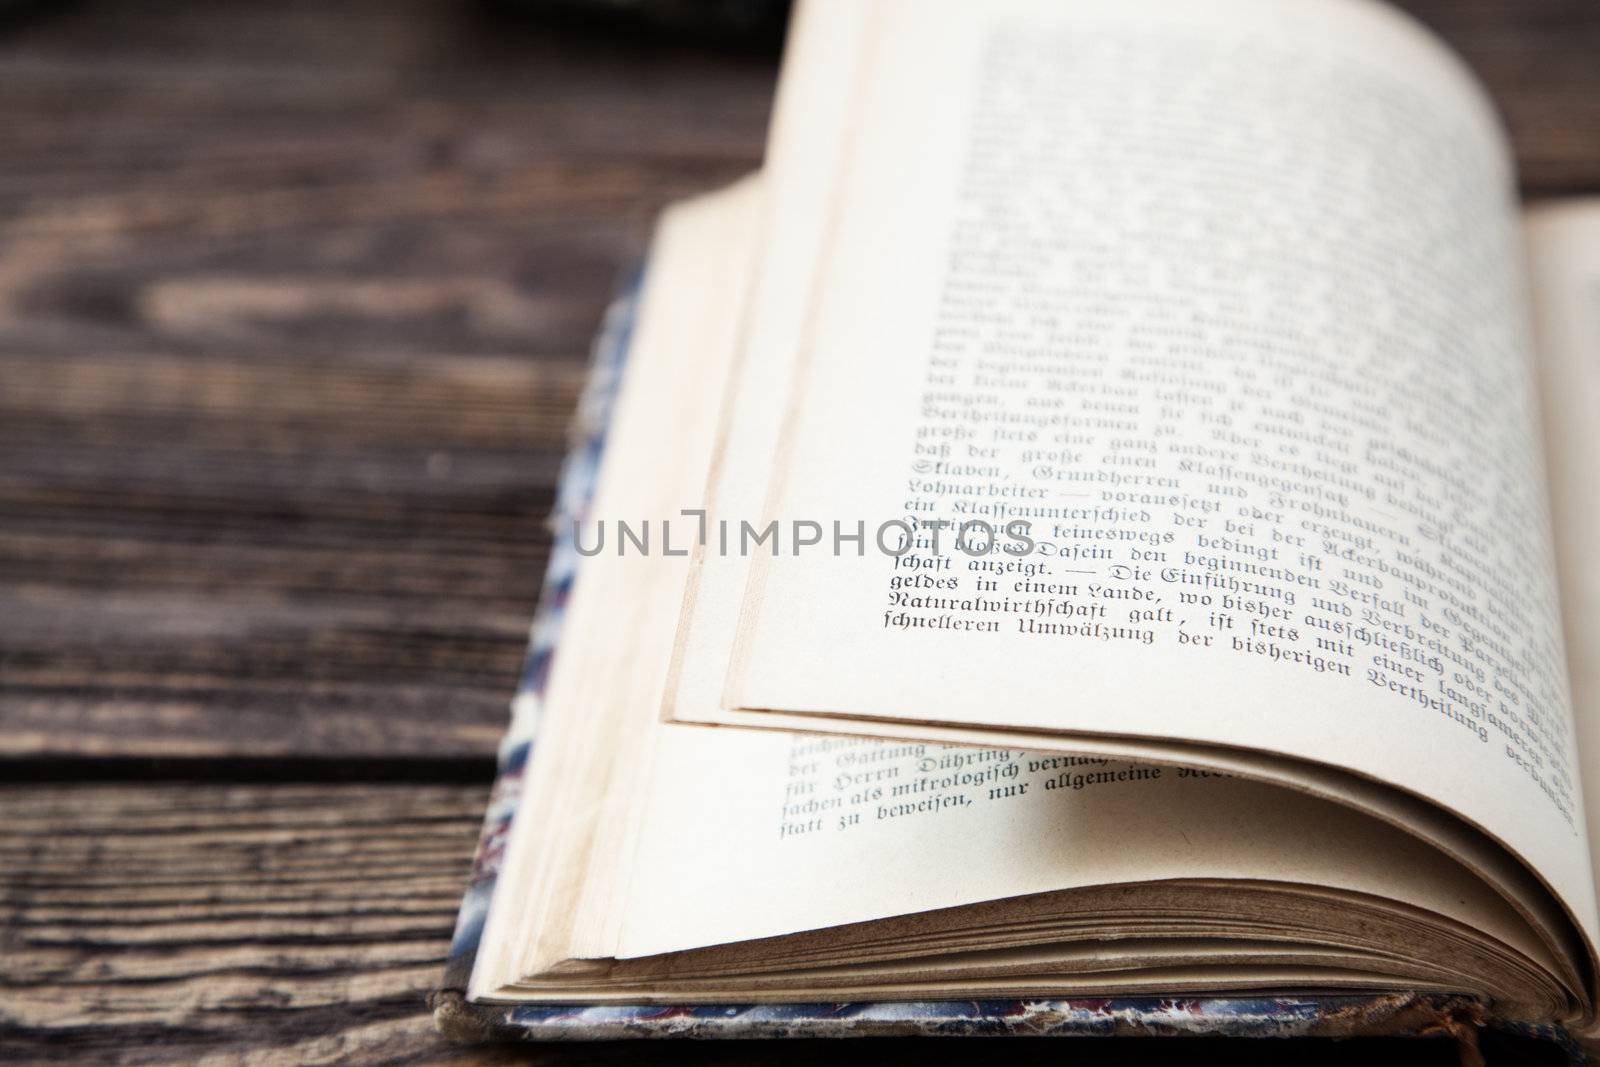 Aged open book on wooden table